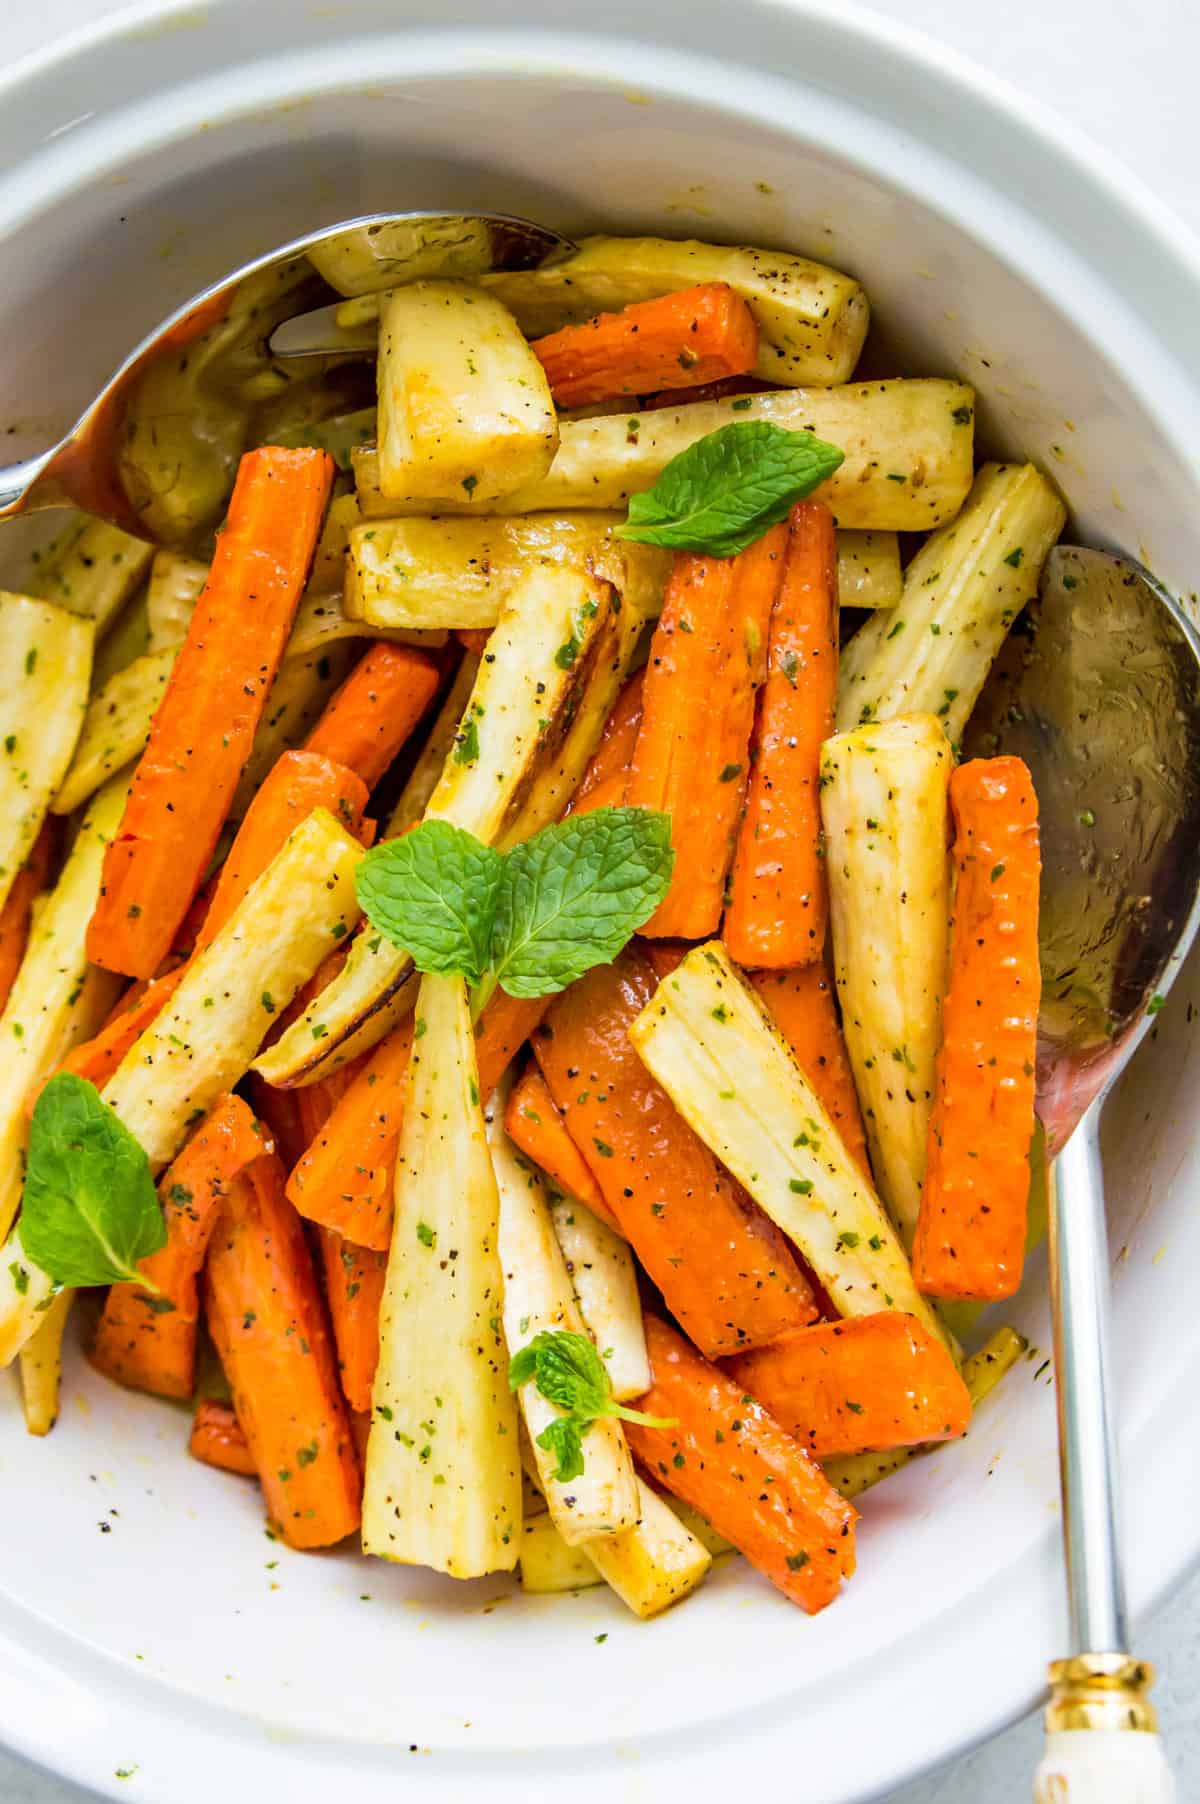 A bowl of roasted carrots and parsnips with mint leaves on top.